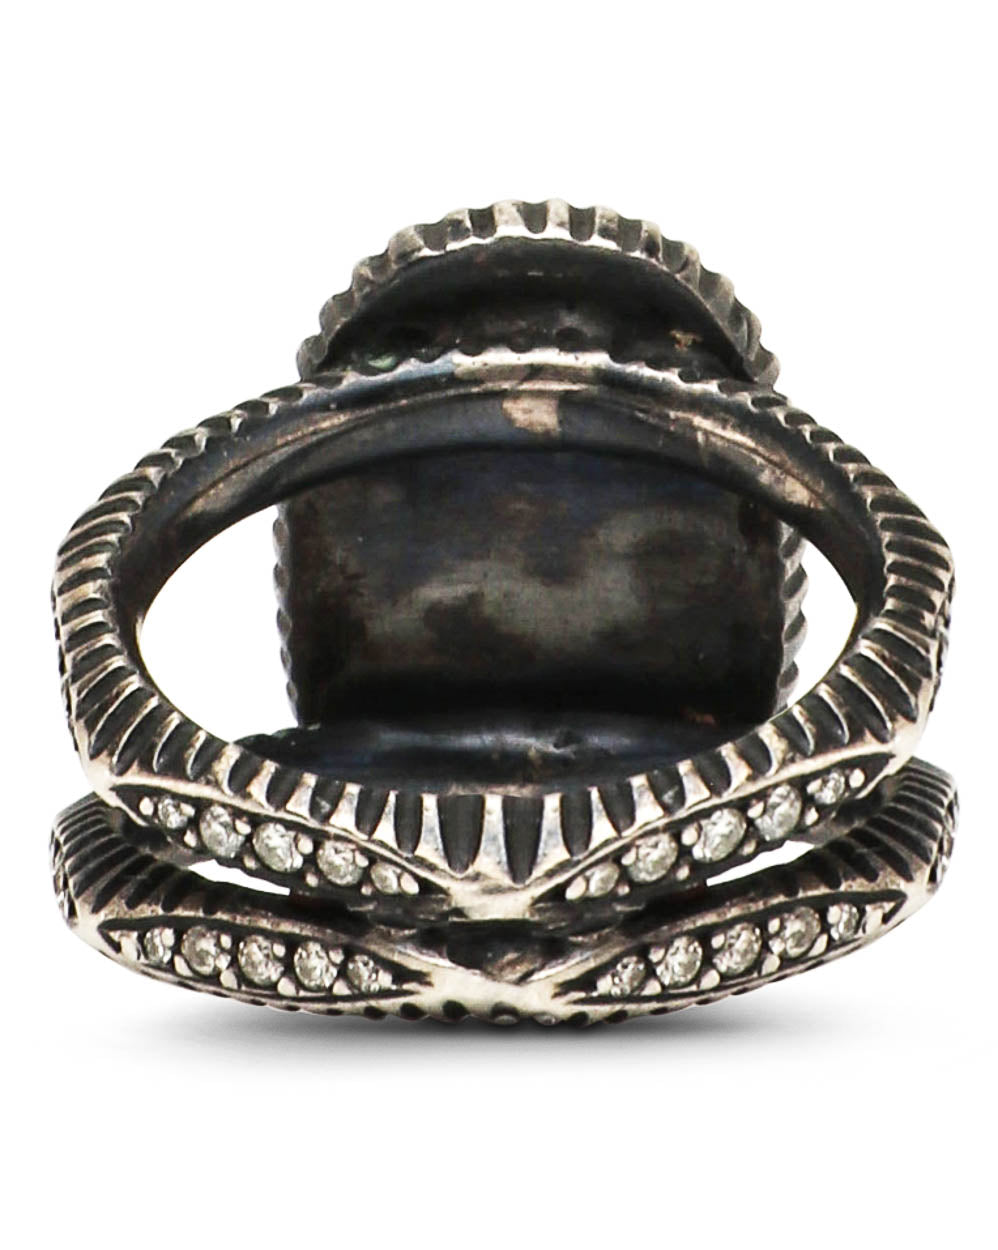 Oxidized Gilver and Rose Cut Diamond Ring